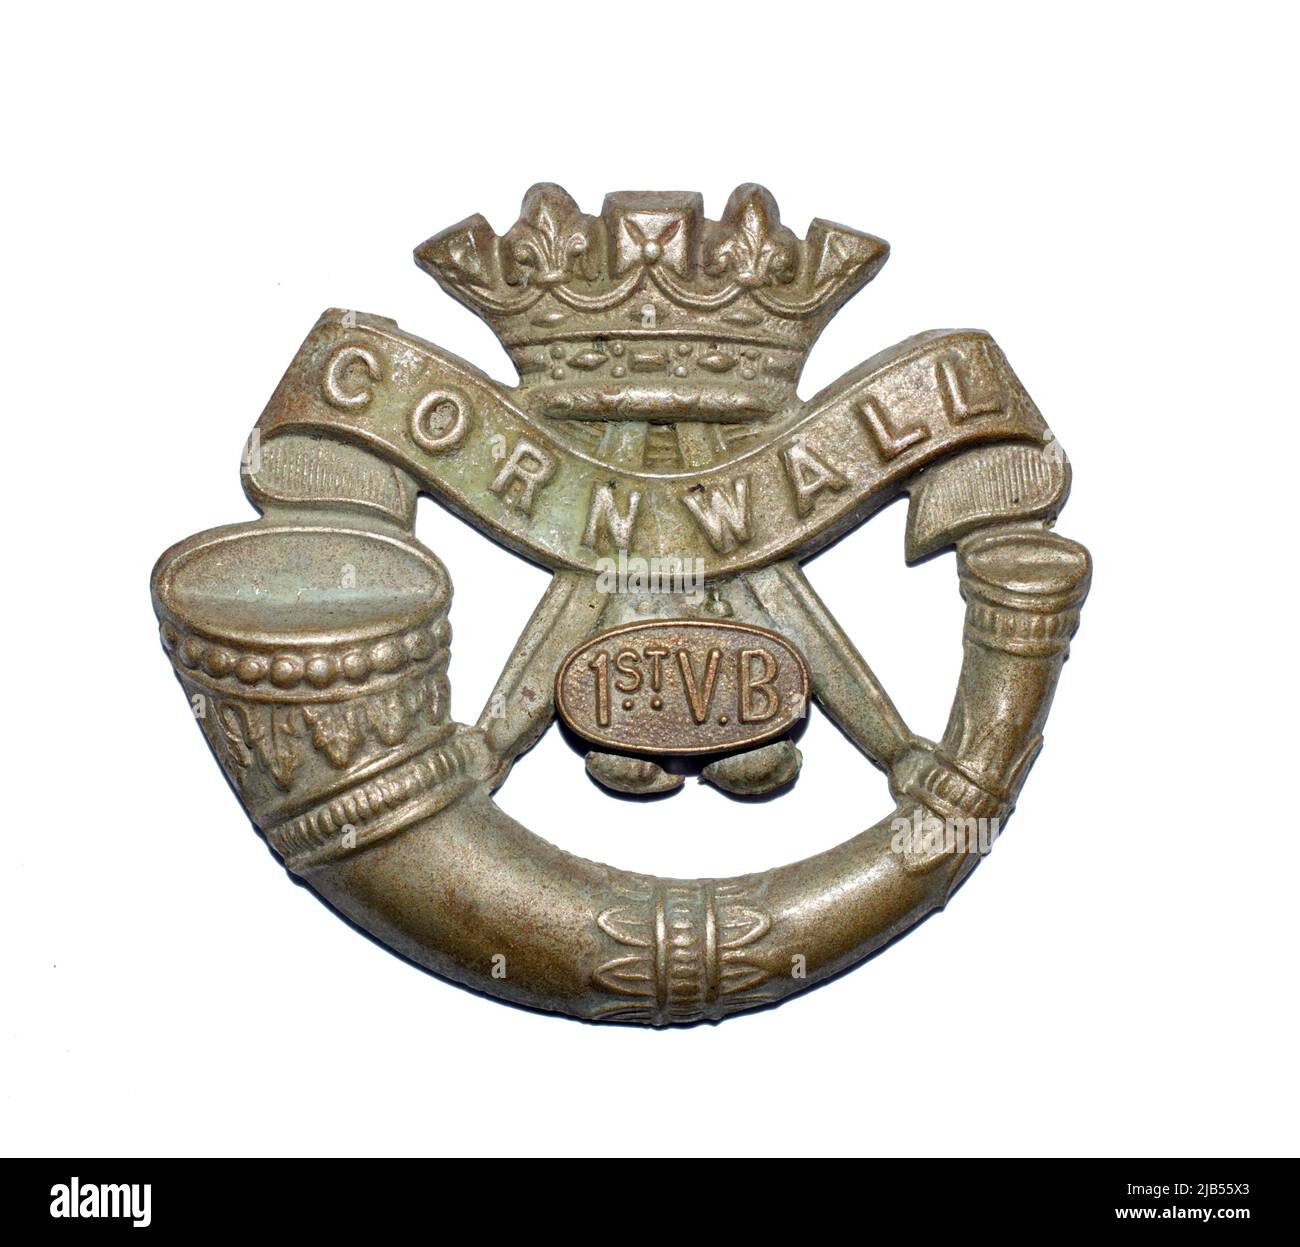 LIGHT INFANTRY CAP BADGE PRINTED ON A METAL SIGN 5 x 7 INCHES.INSIDE/OUTSIDE USE 